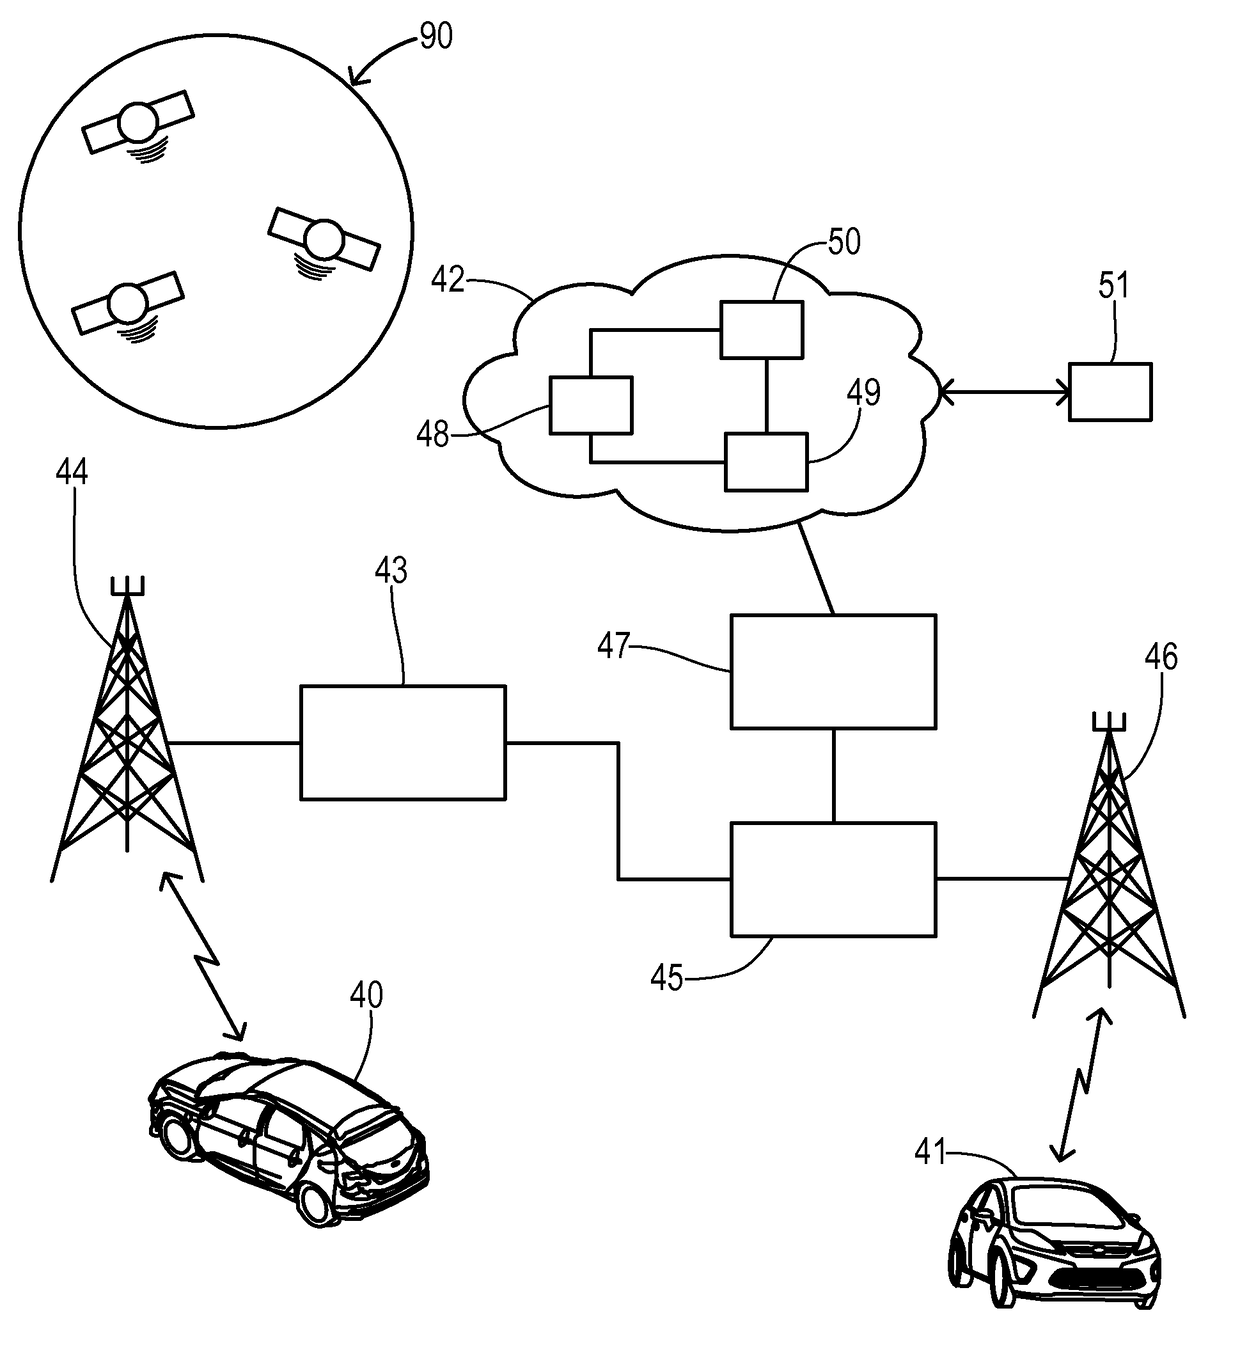 Adaptive control of automotive HVAC system using crowd-sourcing data